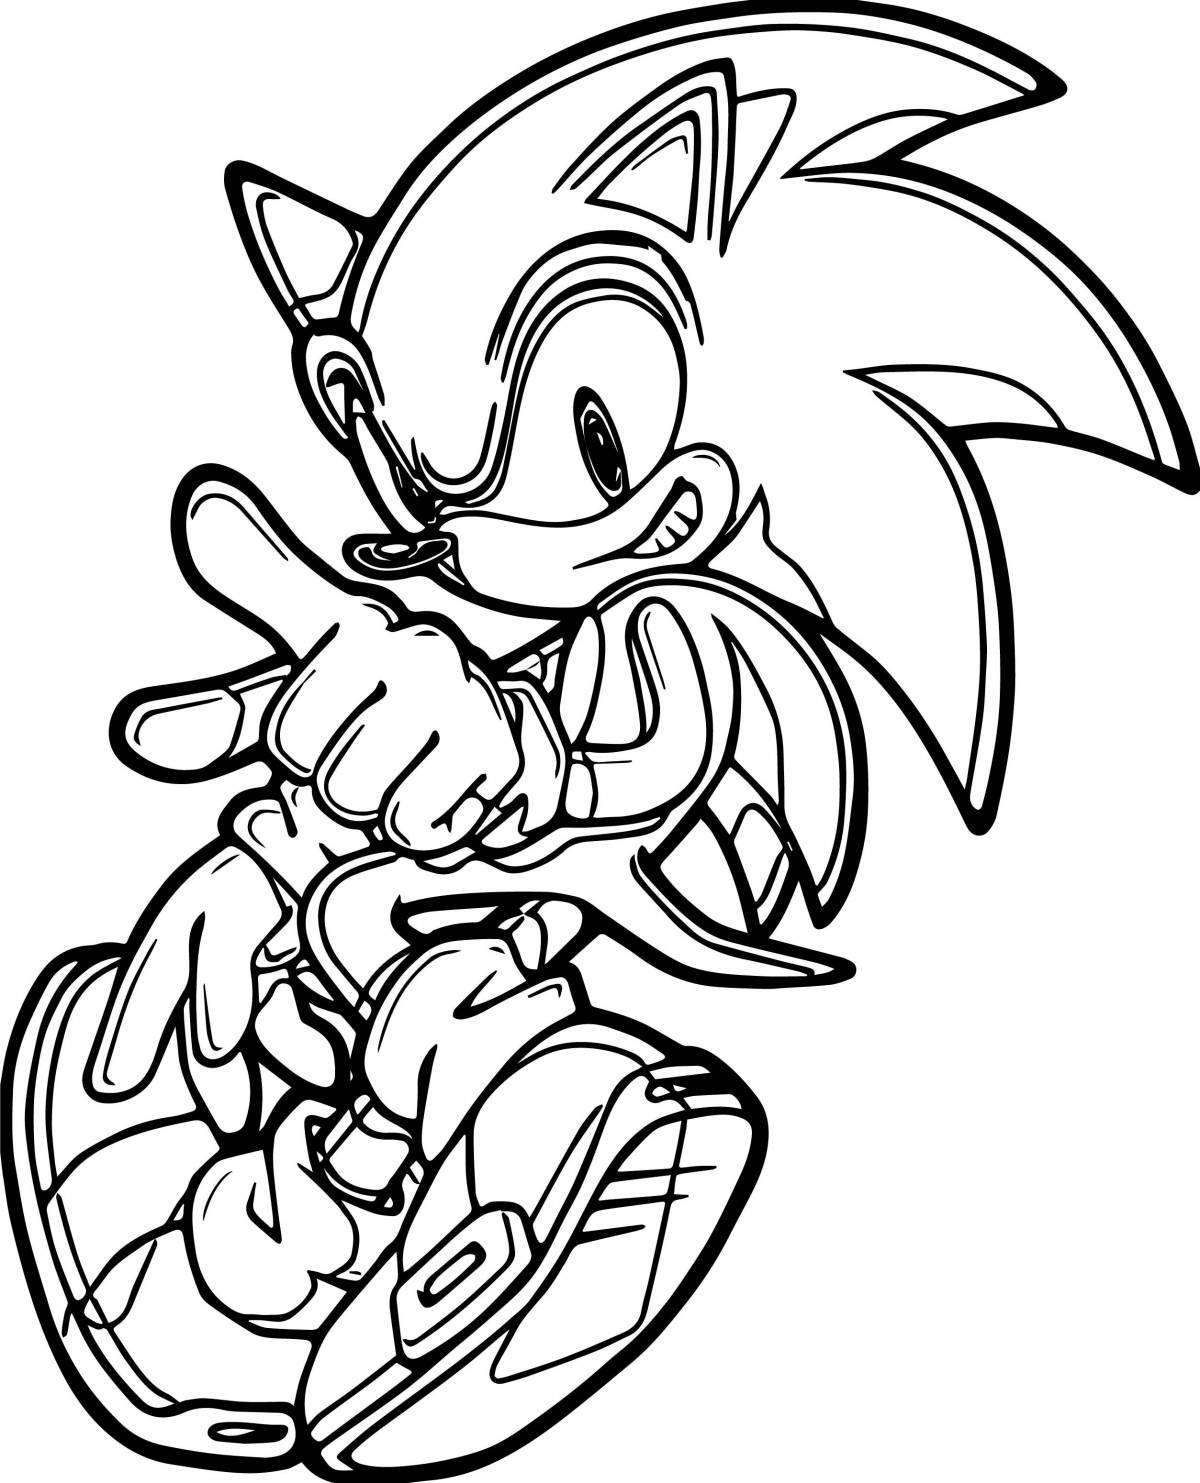 Sonic robot dazzling coloring book